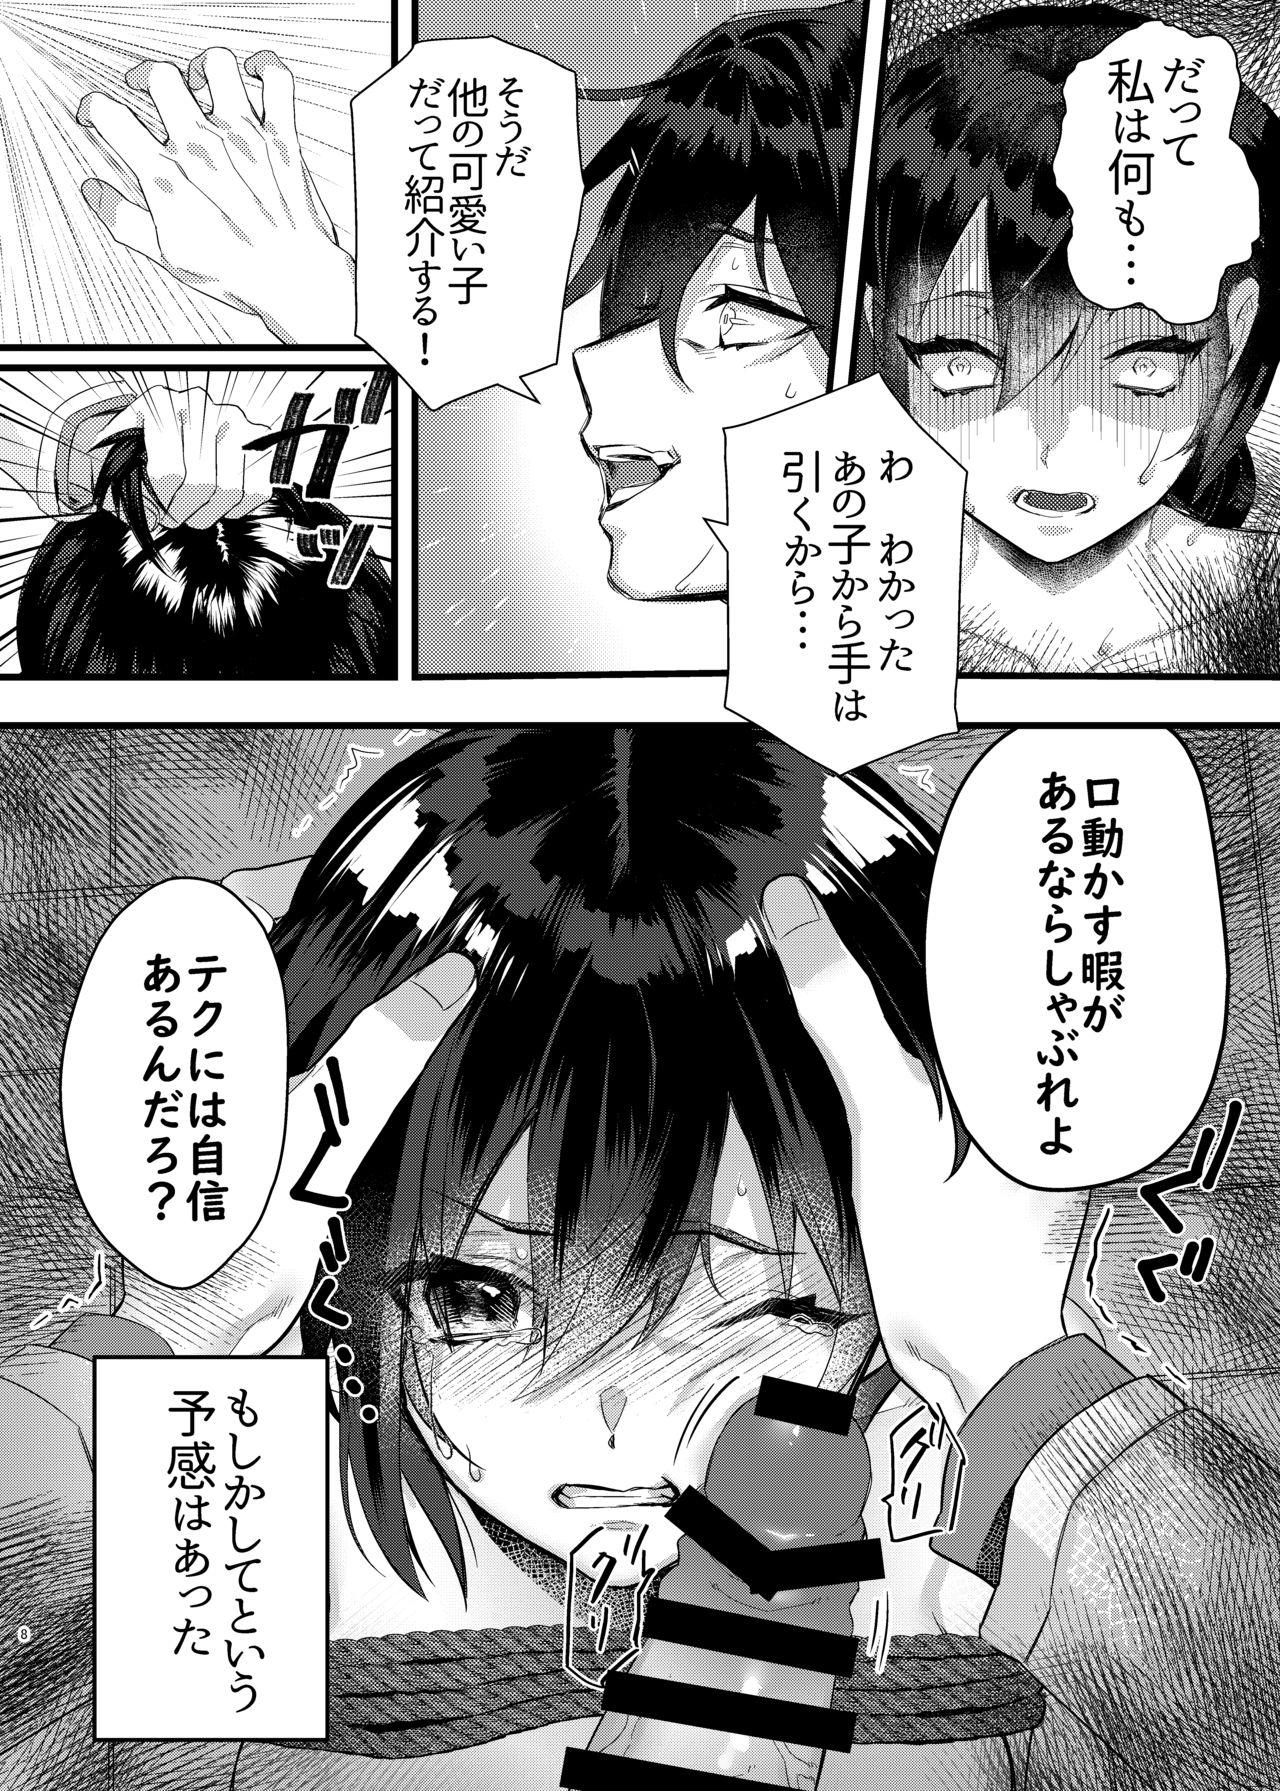 Old And Young 緊縛少女〜百合の花を手折る〜 - Original Tgirls - Page 9